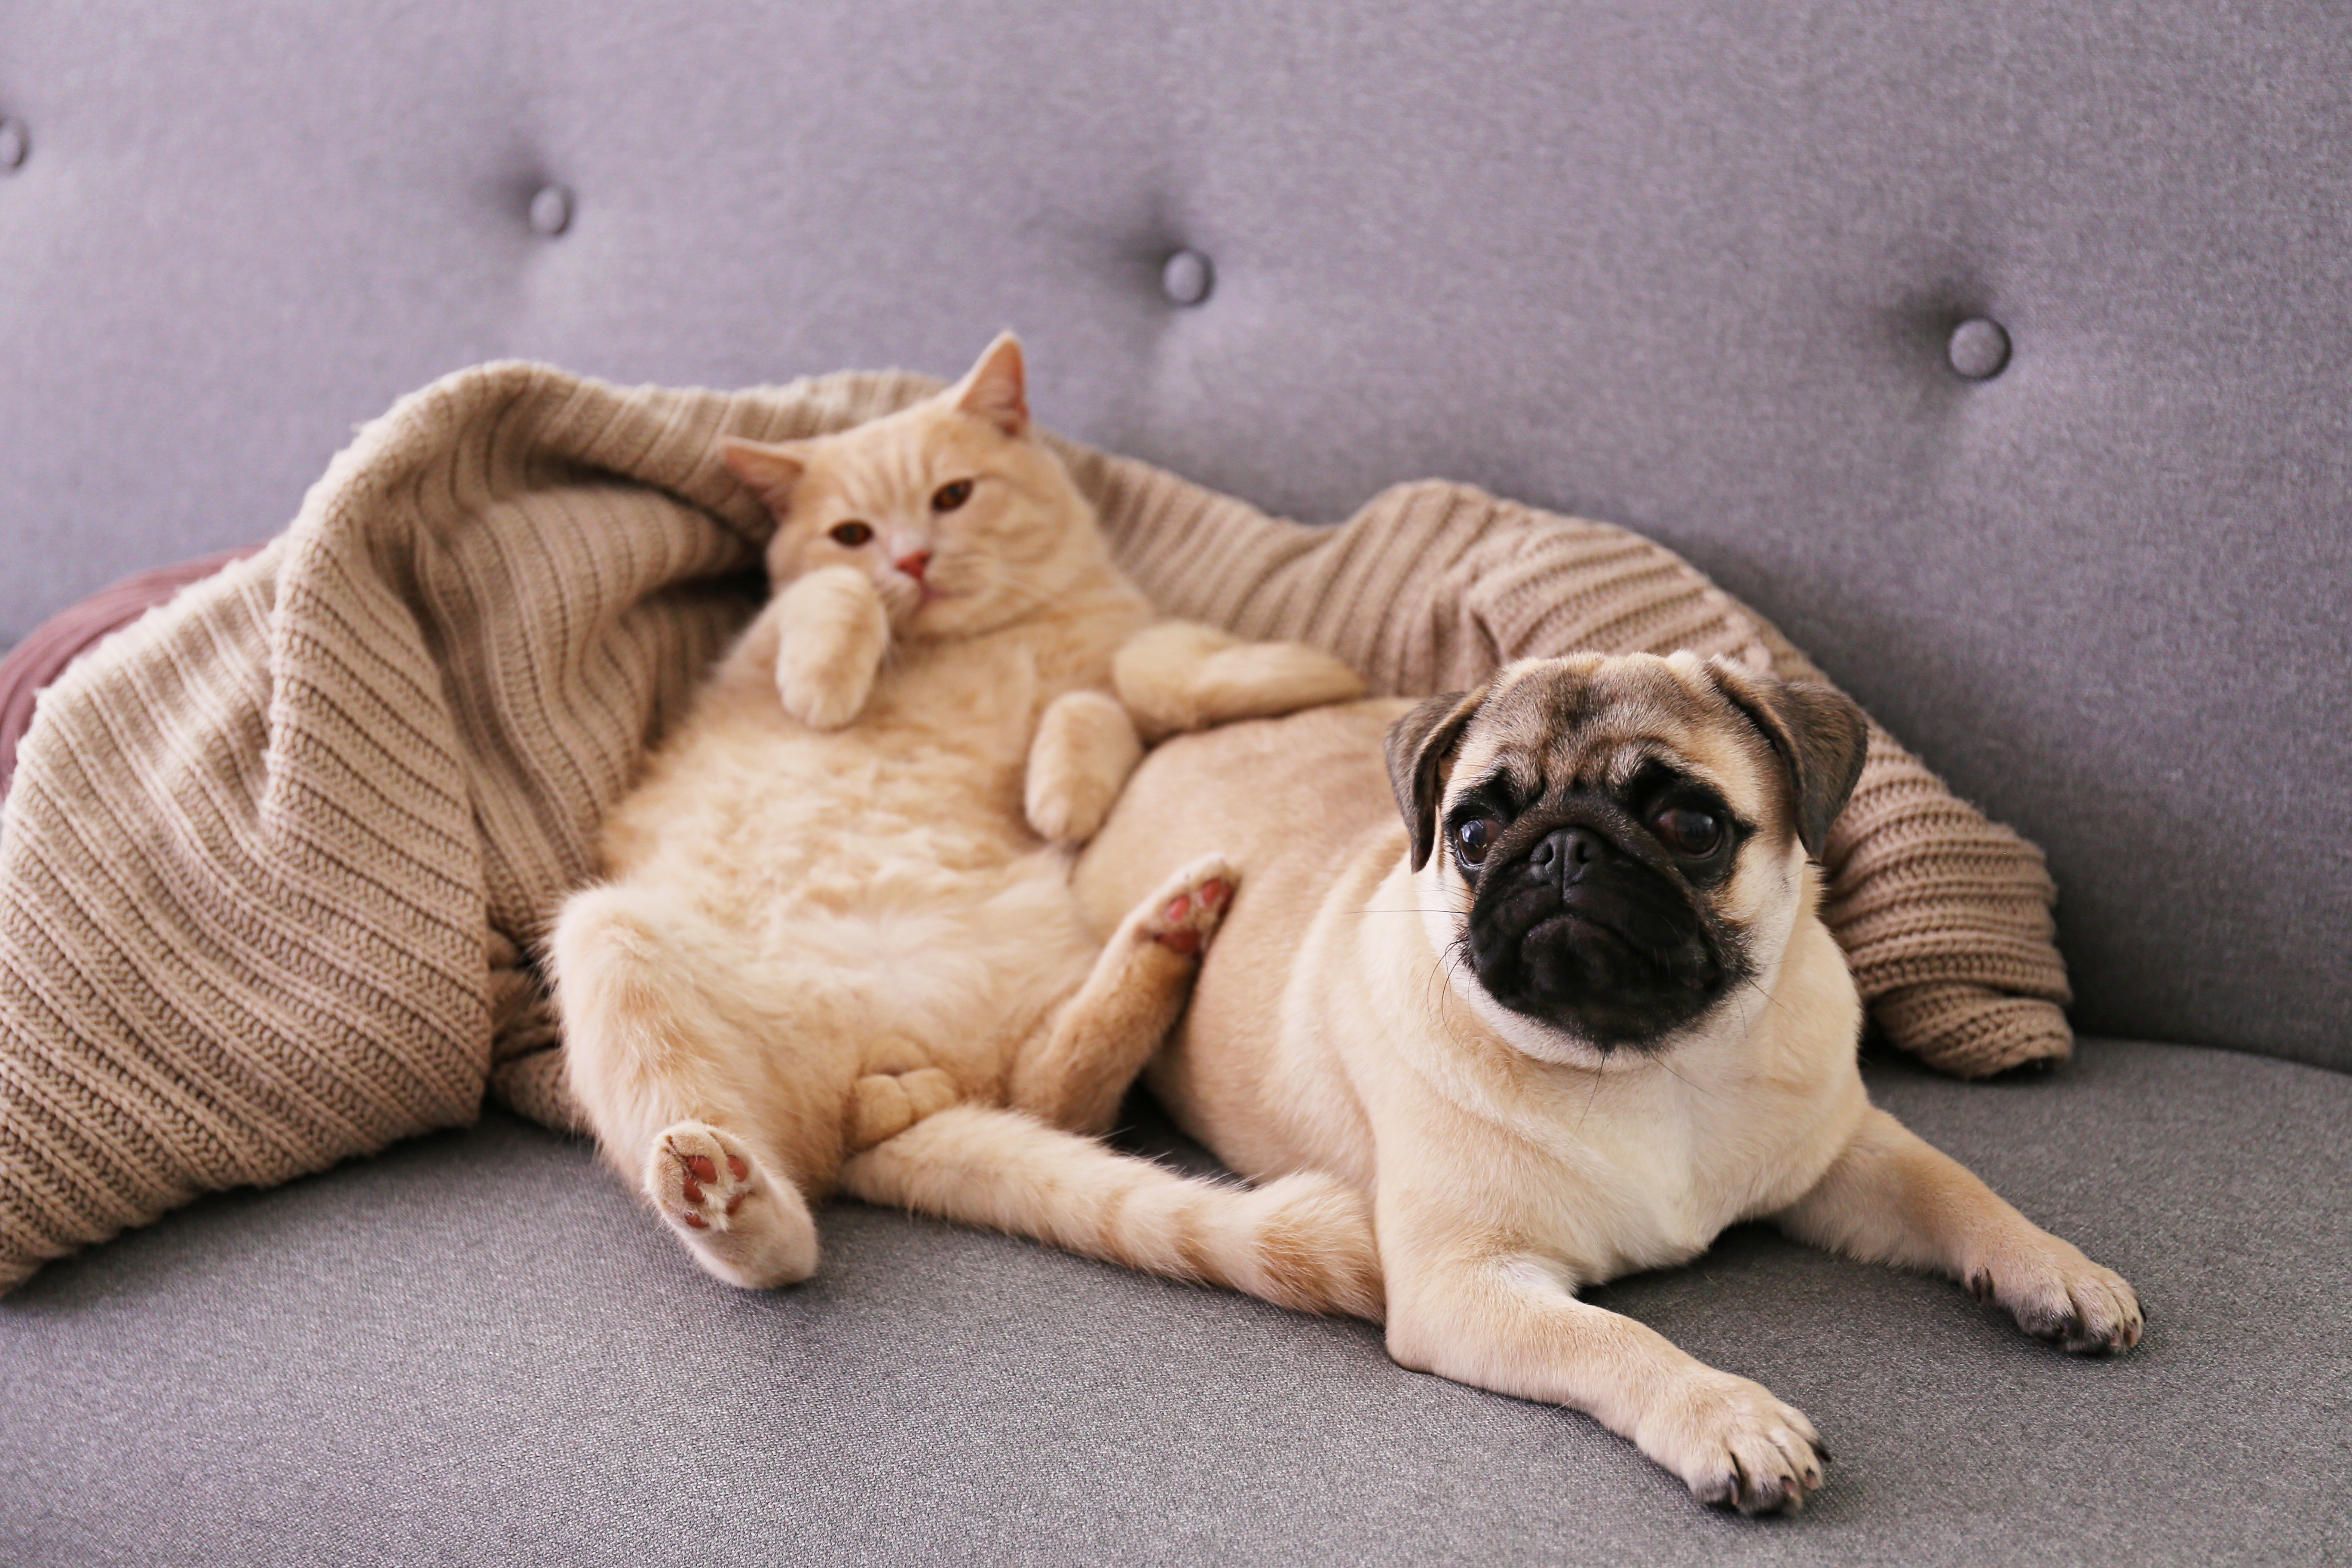 Cat and dog relaxing